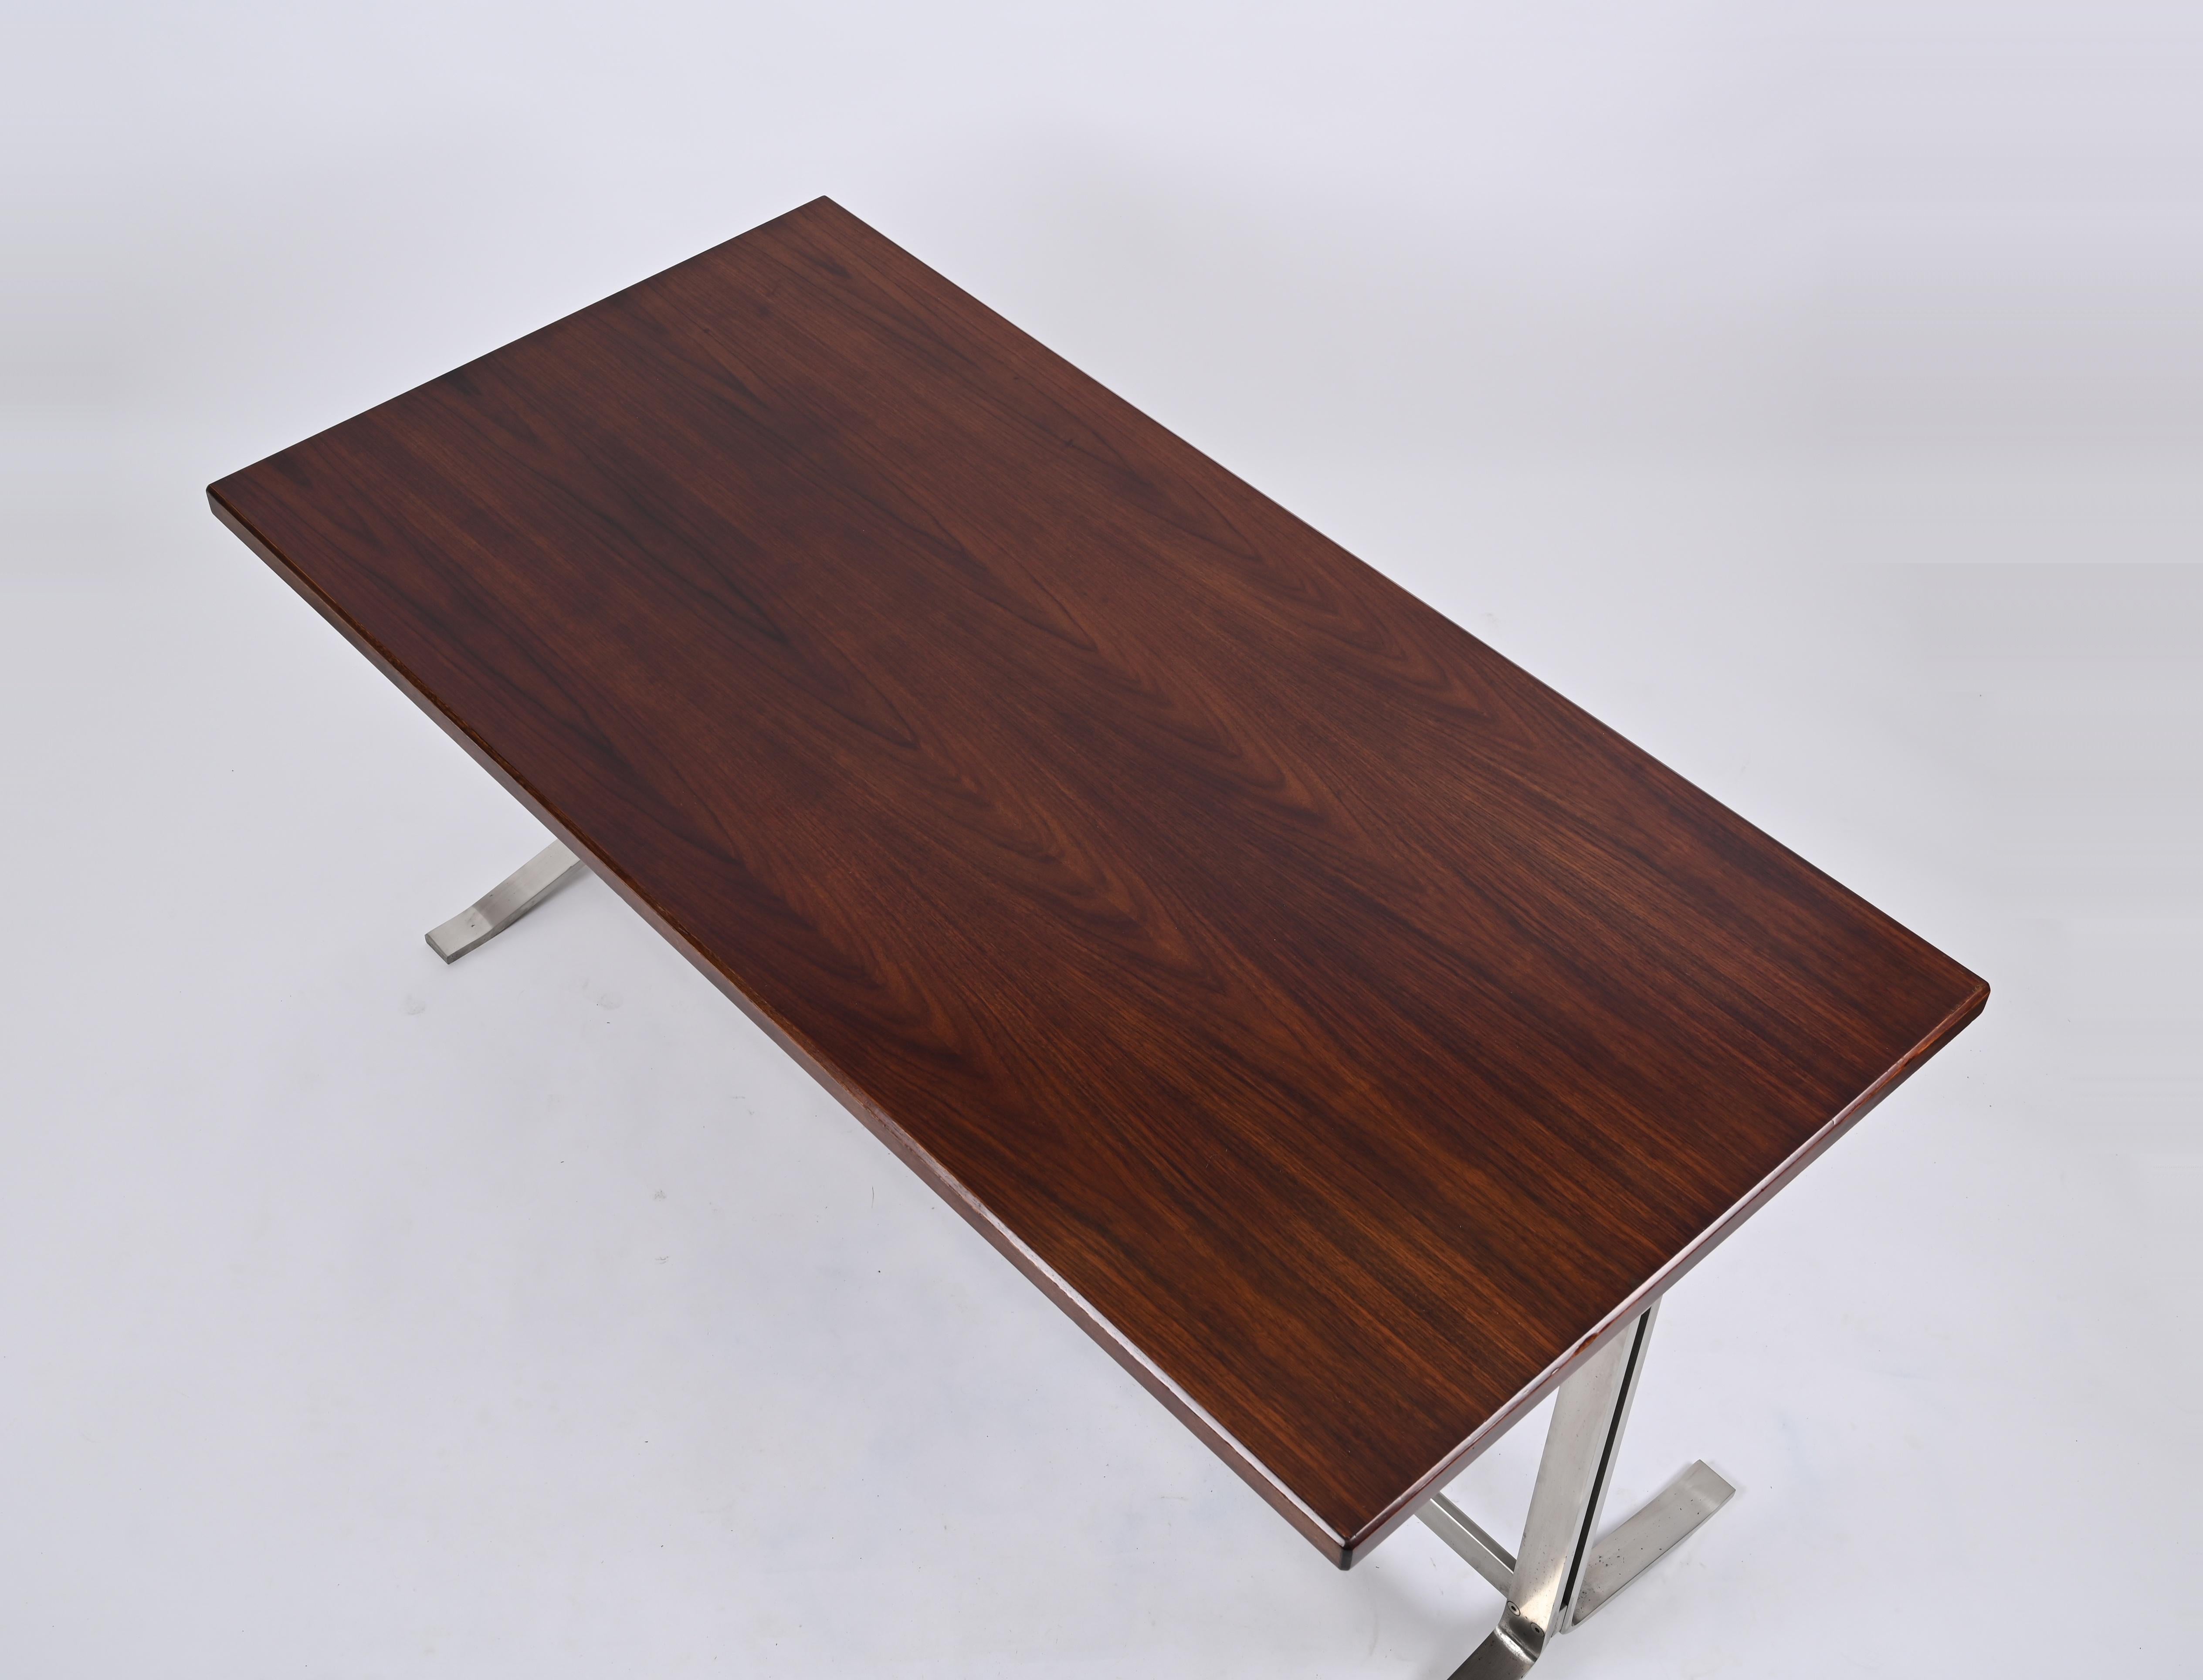 Astonishing desk designed by Gianni Moscatelli and produced by Formanova in Italy in 1965.

The desk features rectangular tabletop in walnut with wonderful wood grain, the quality of the wood on this desk is outstanding and the simple straight lines